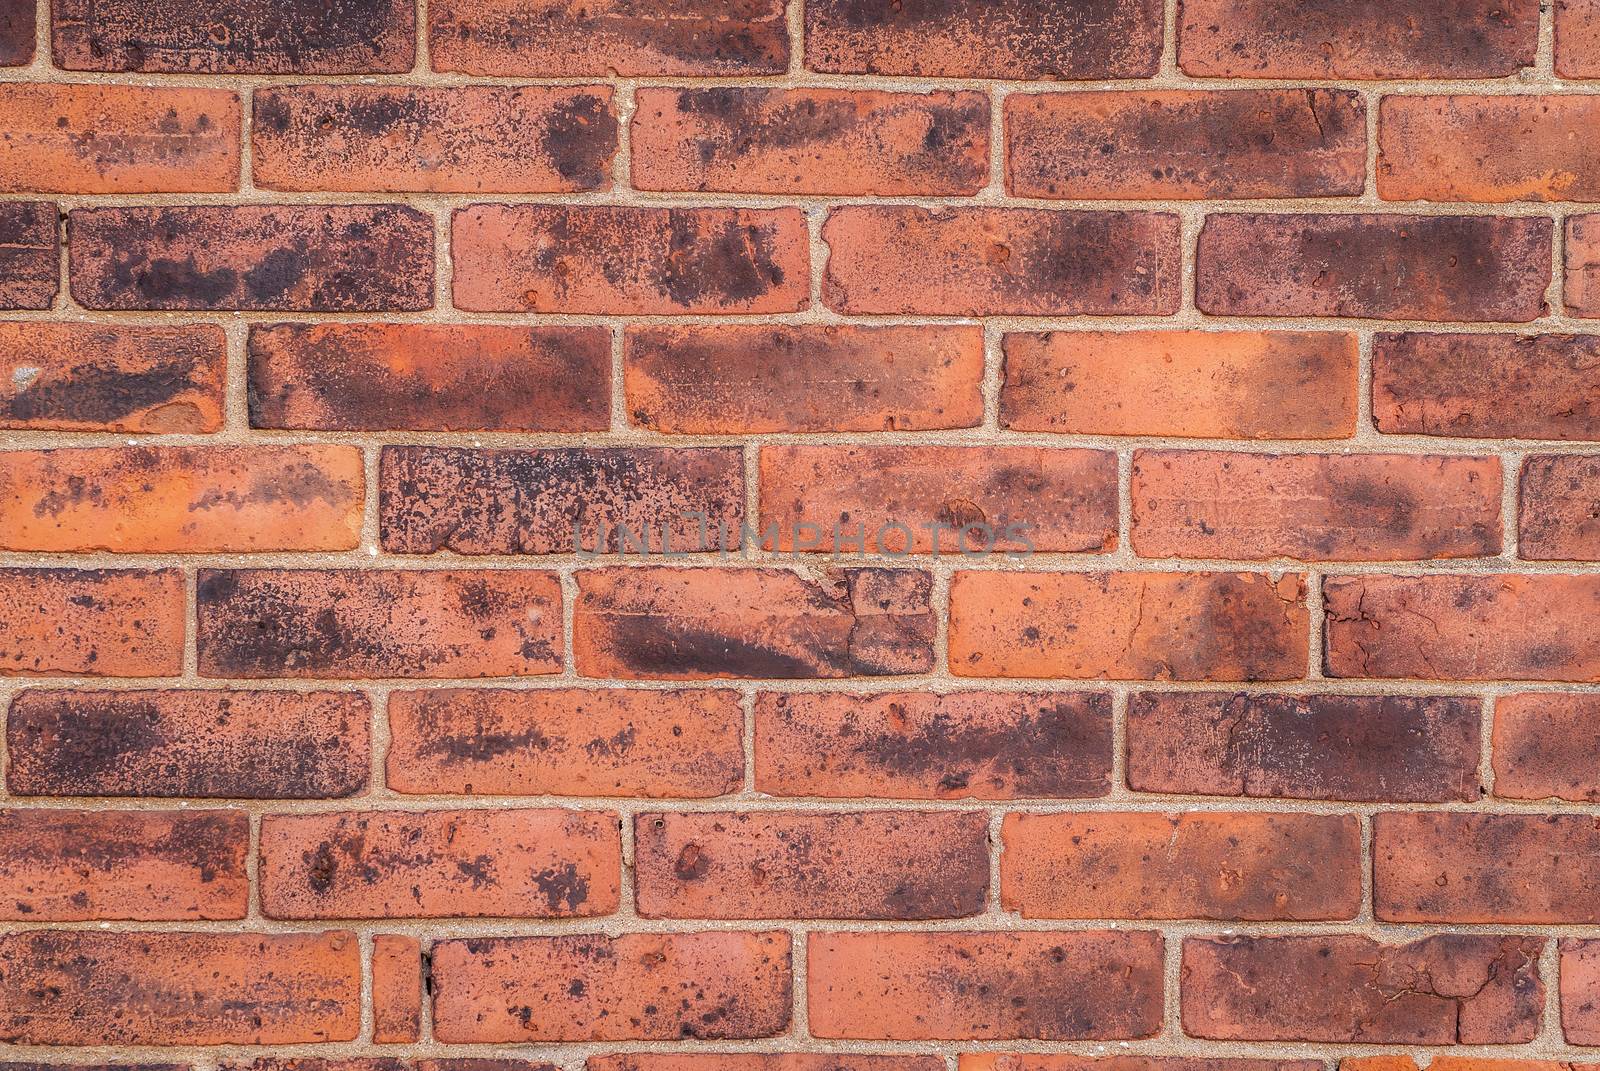 Brick Wall Background by billberryphotography